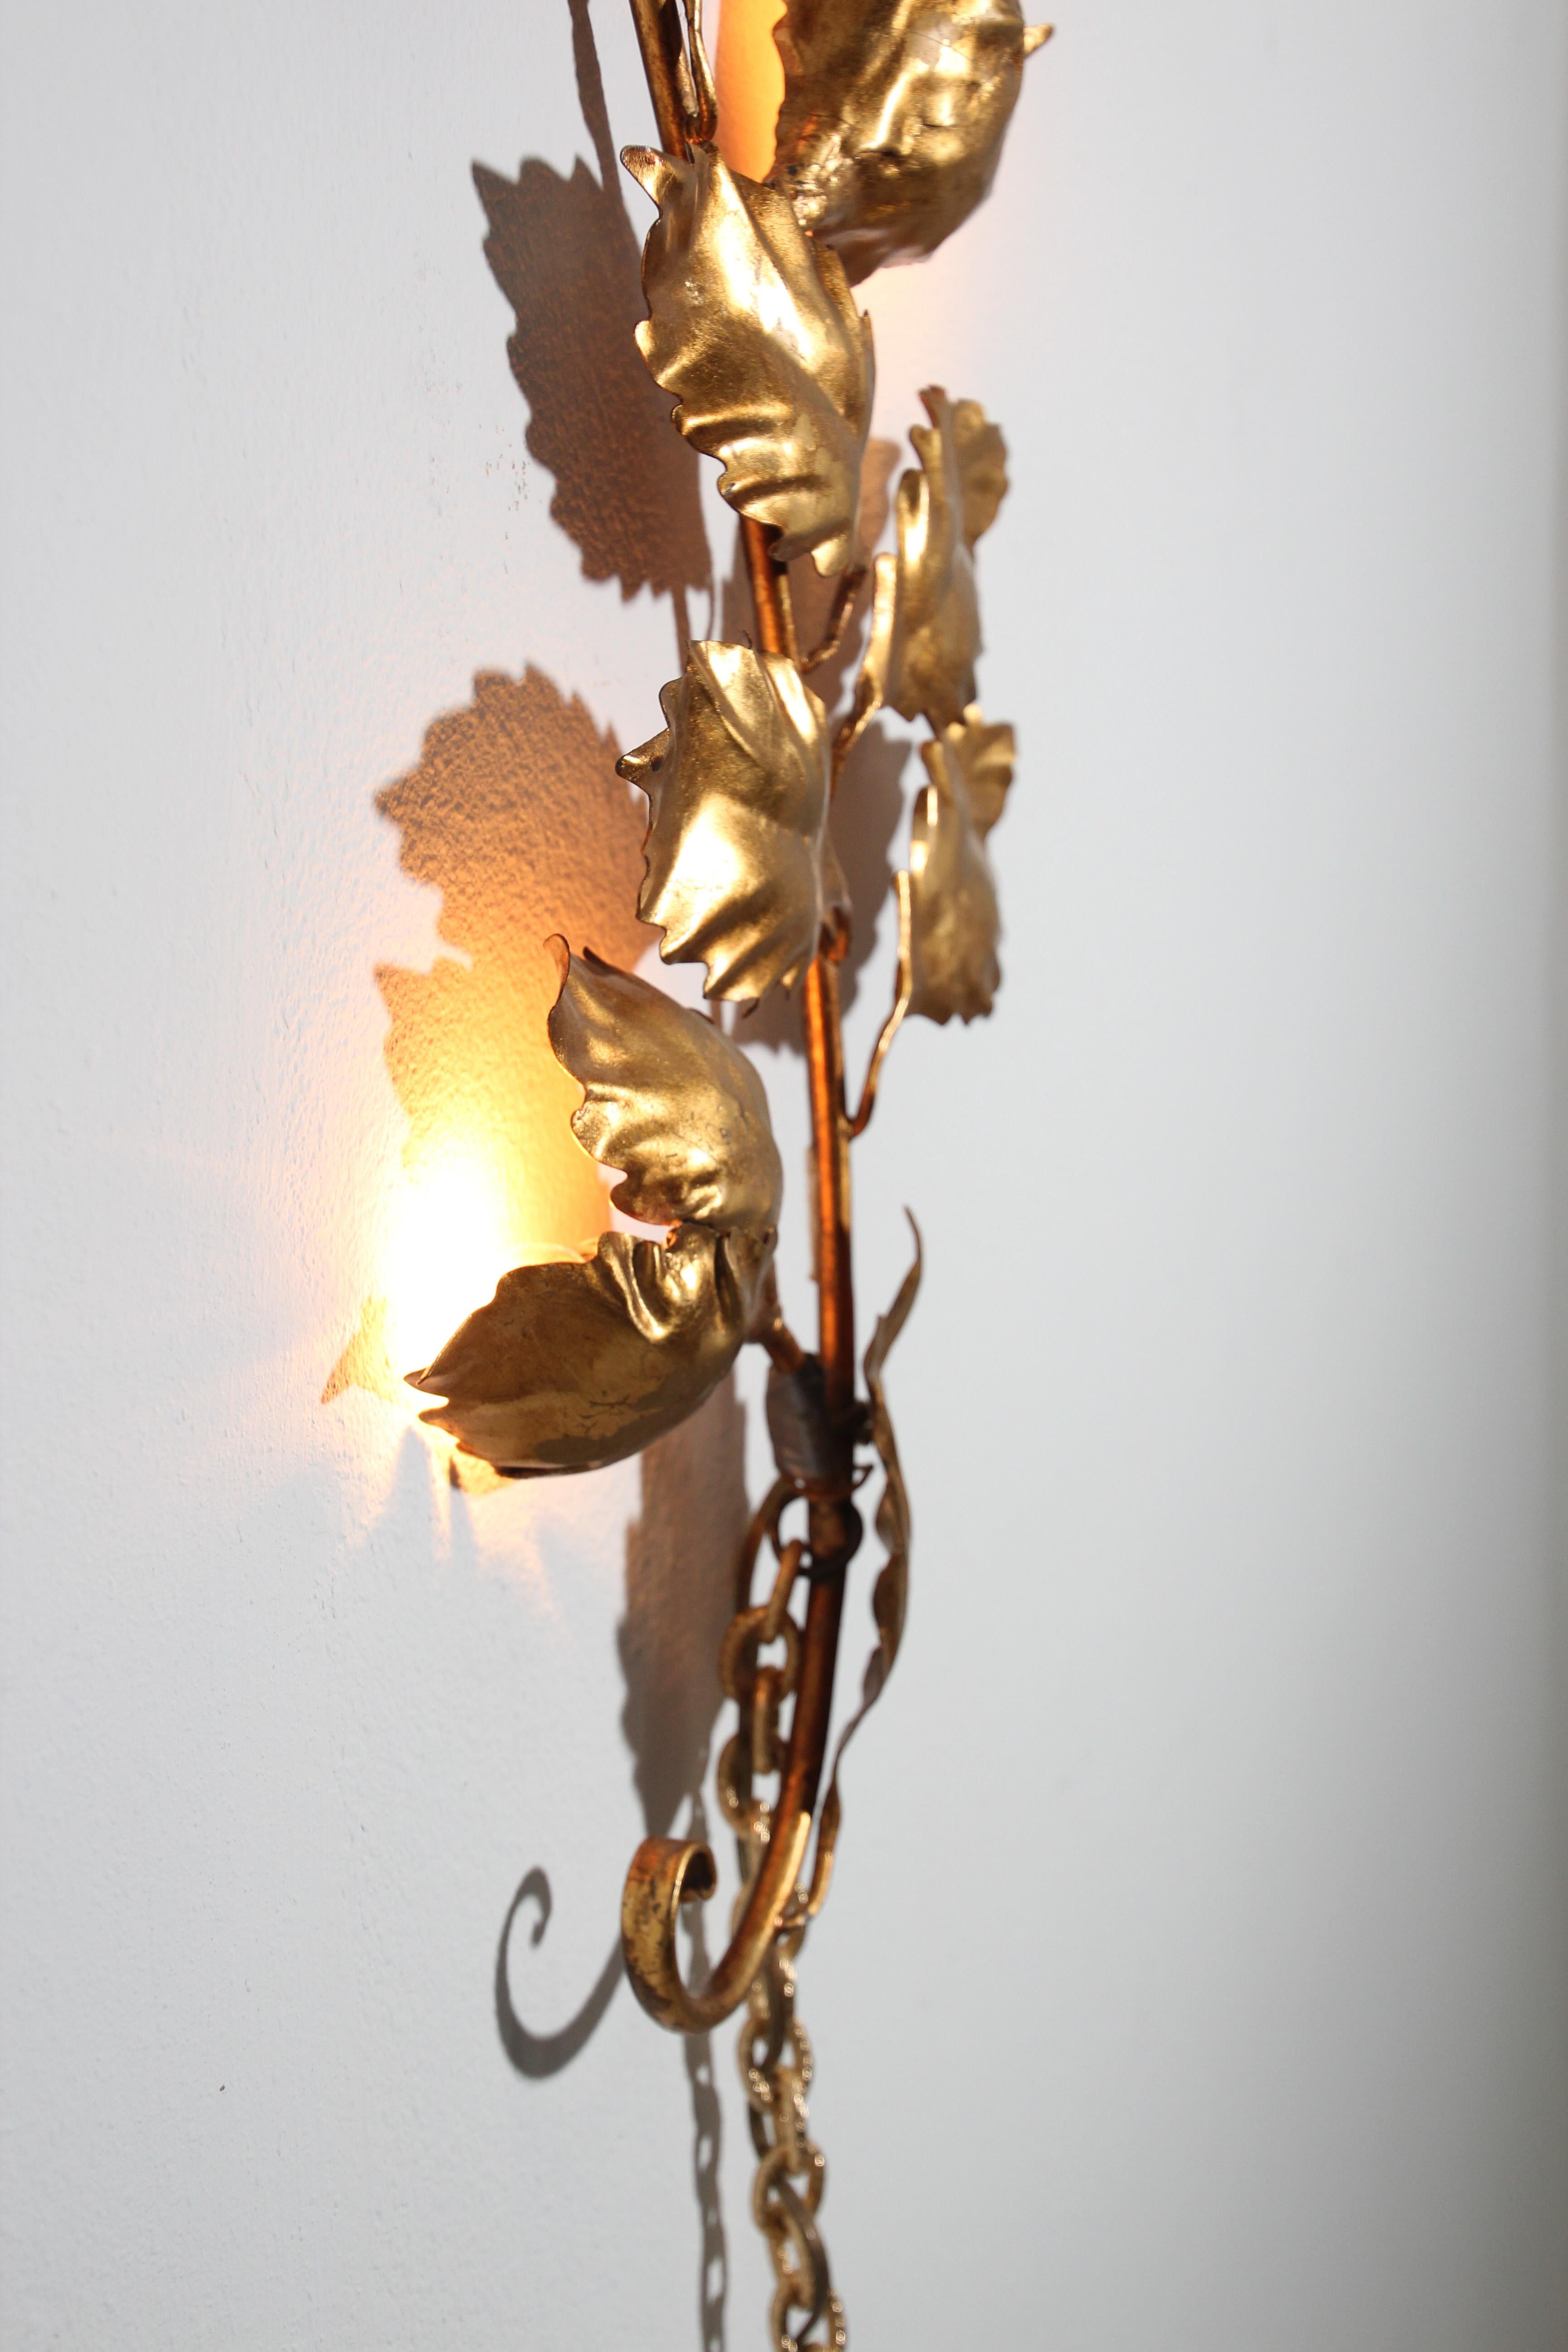 Italian 1960s Hollywood Regency Gilt Metal Wall Sconce, by Hans Kogl In Good Condition For Sale In North Hollywood, CA